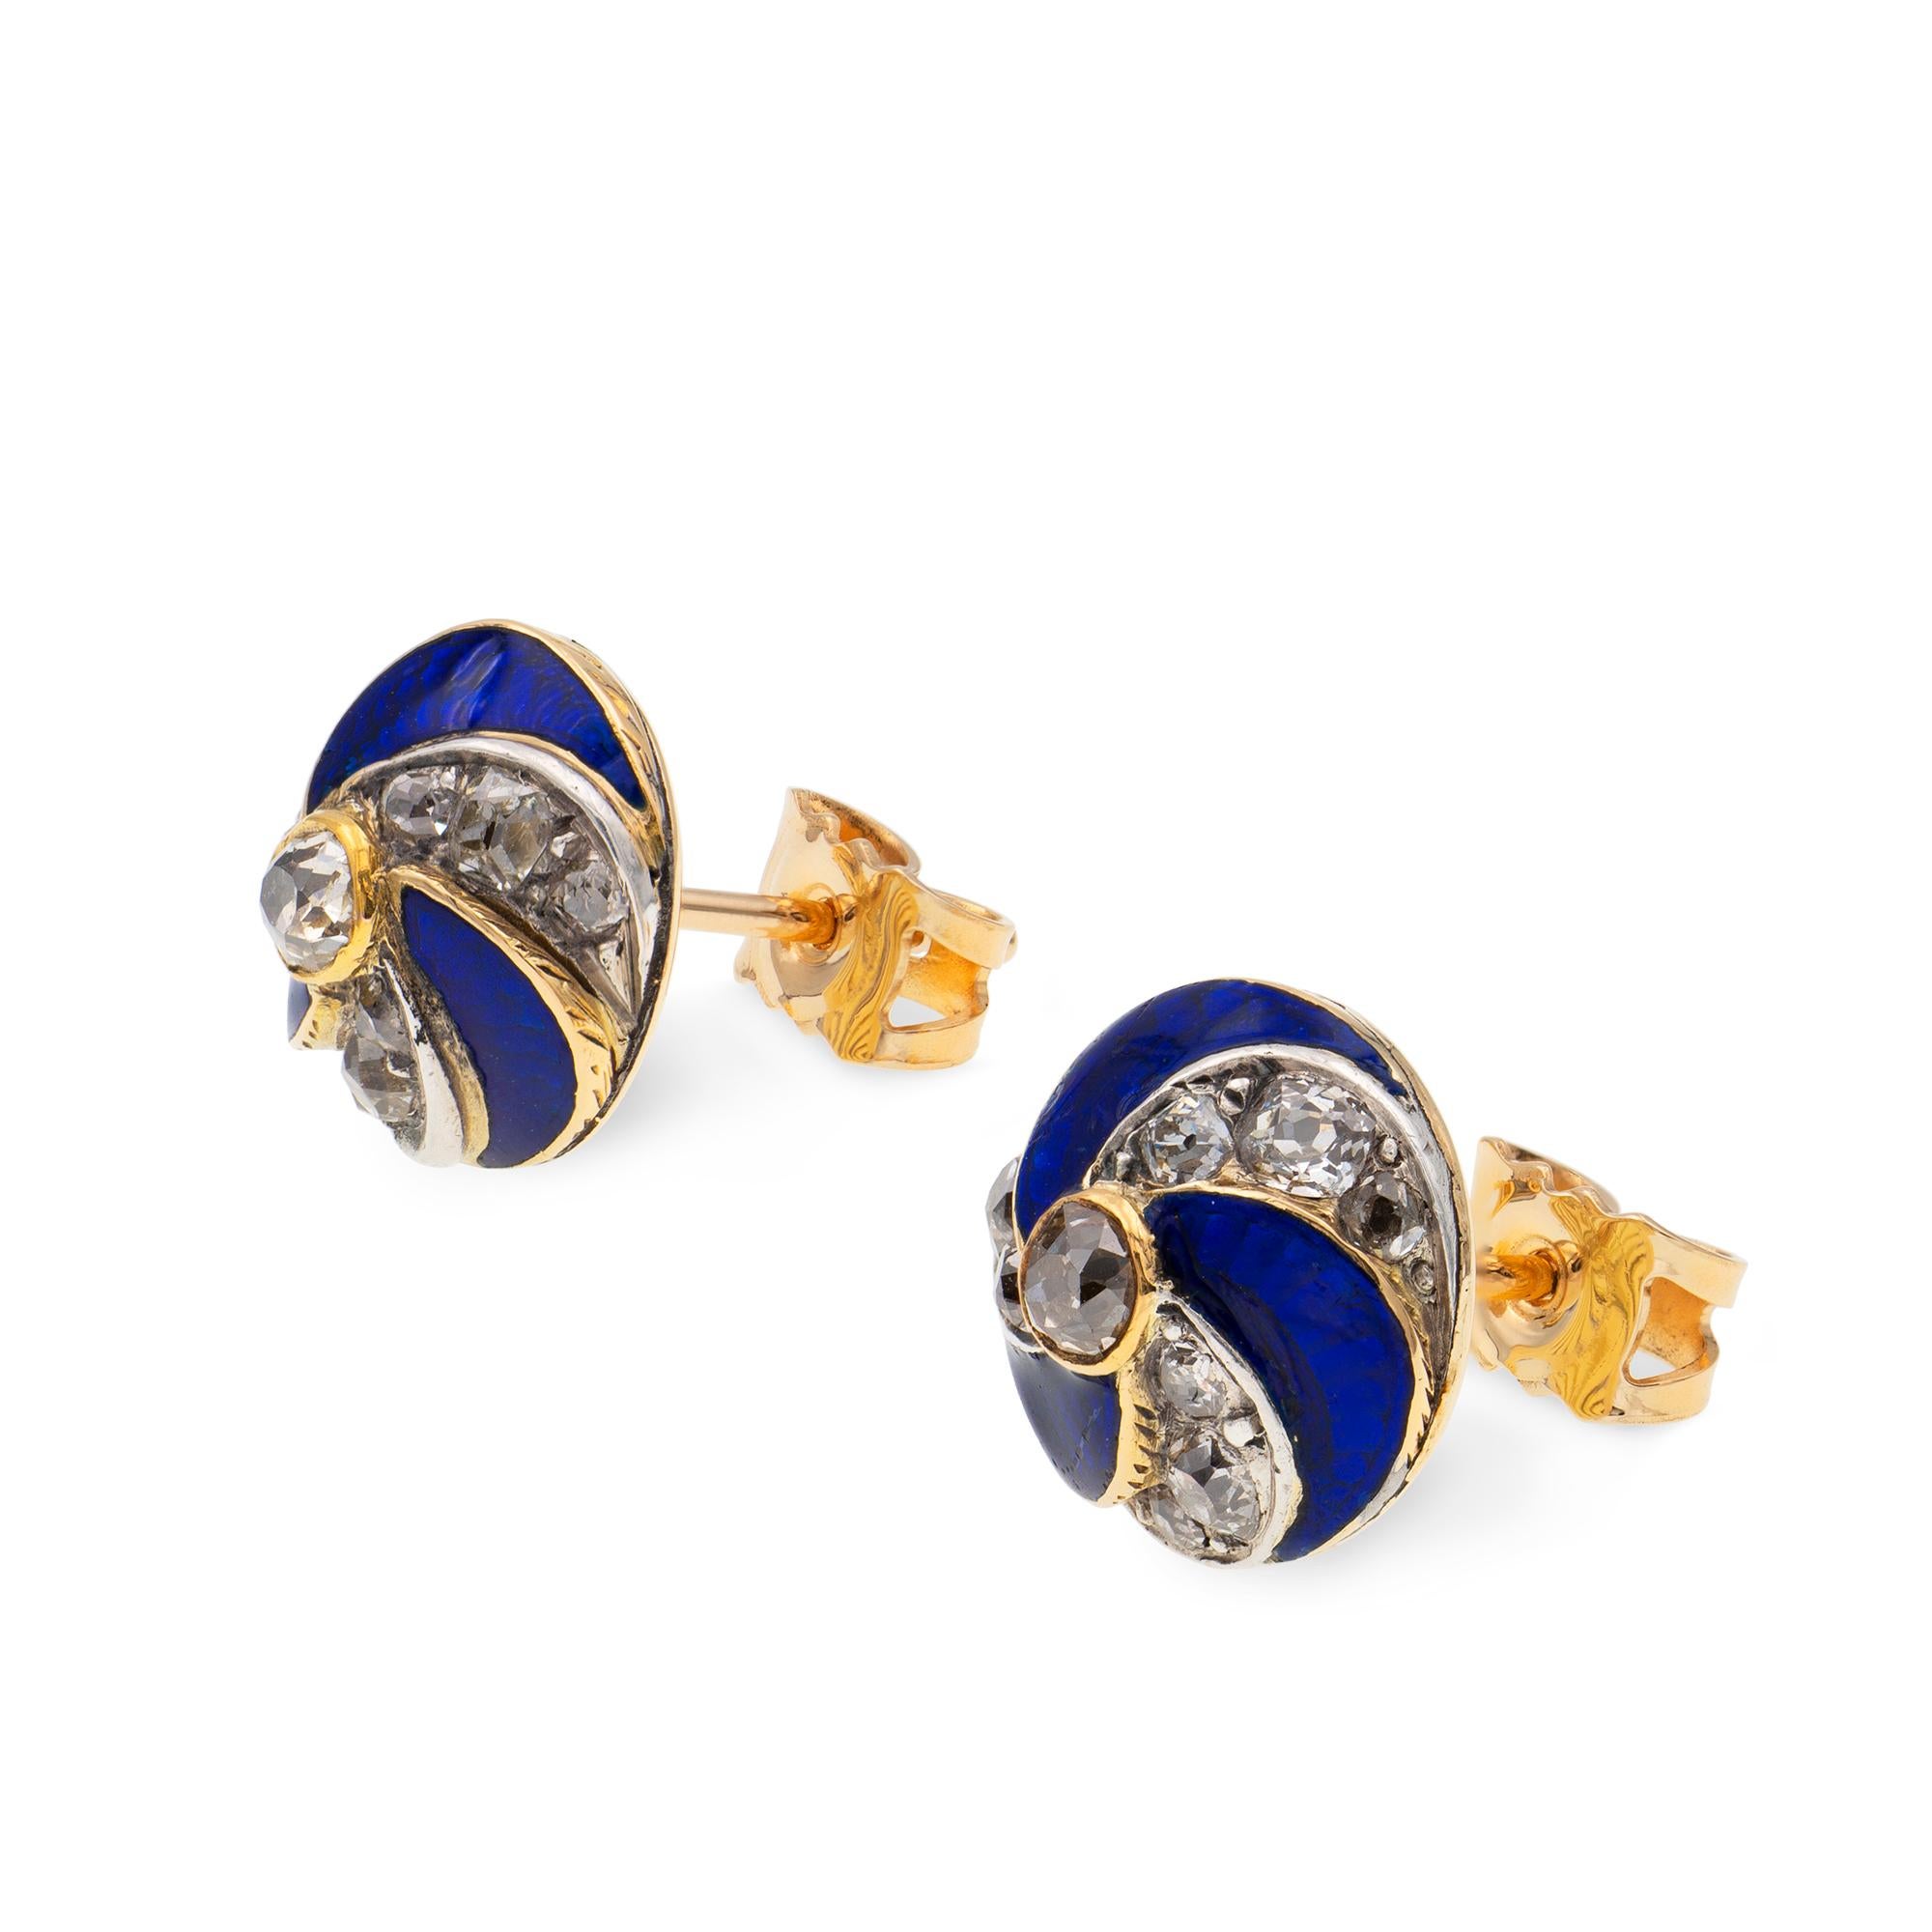 A pair of Victorian blue enamel and diamond stud earrings, each stud centrally set with an old-cut diamond, surrounded by three blue enamelled and three diamond-set sections of spiral design, the diamonds estimated to weigh 1 carat in total, all set